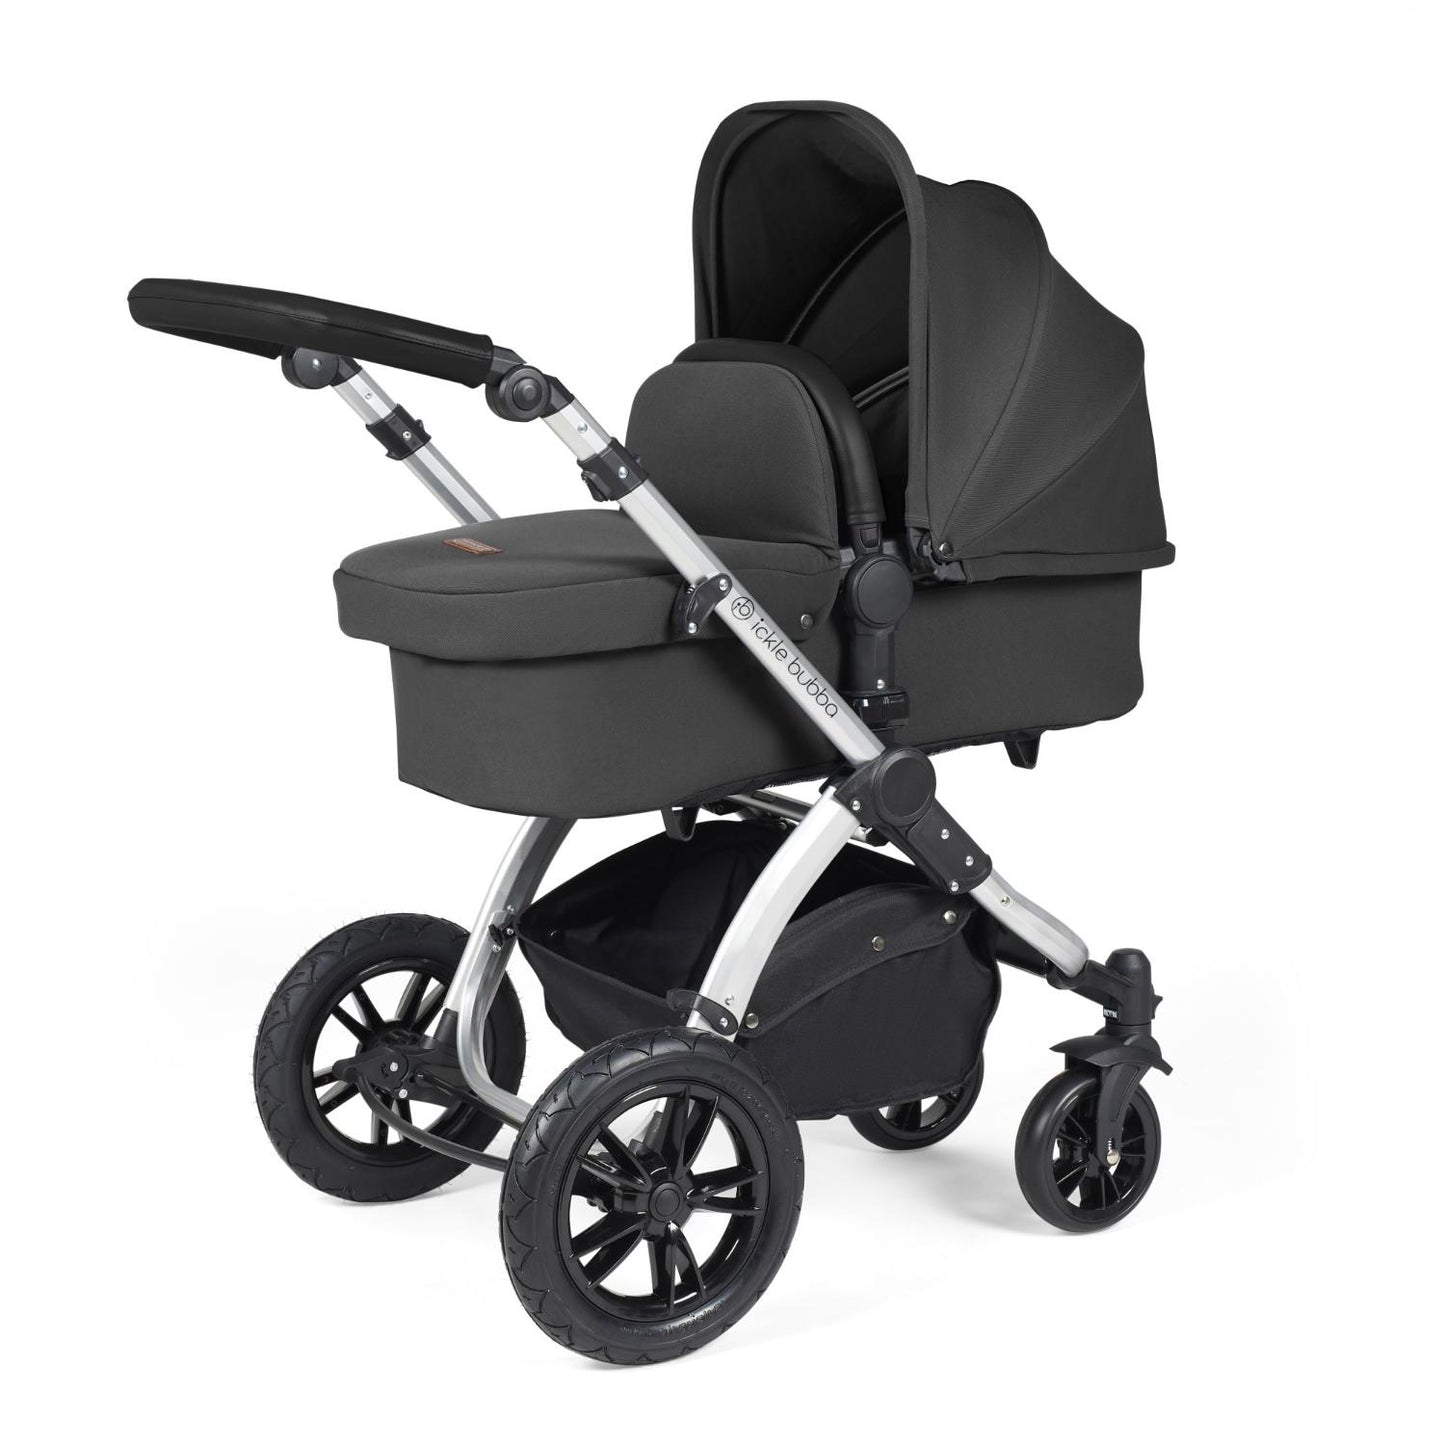 Ickle Bubba Stomp Luxe Pushchair with carrycot attached in Charcoal Grey colour with silver chassis